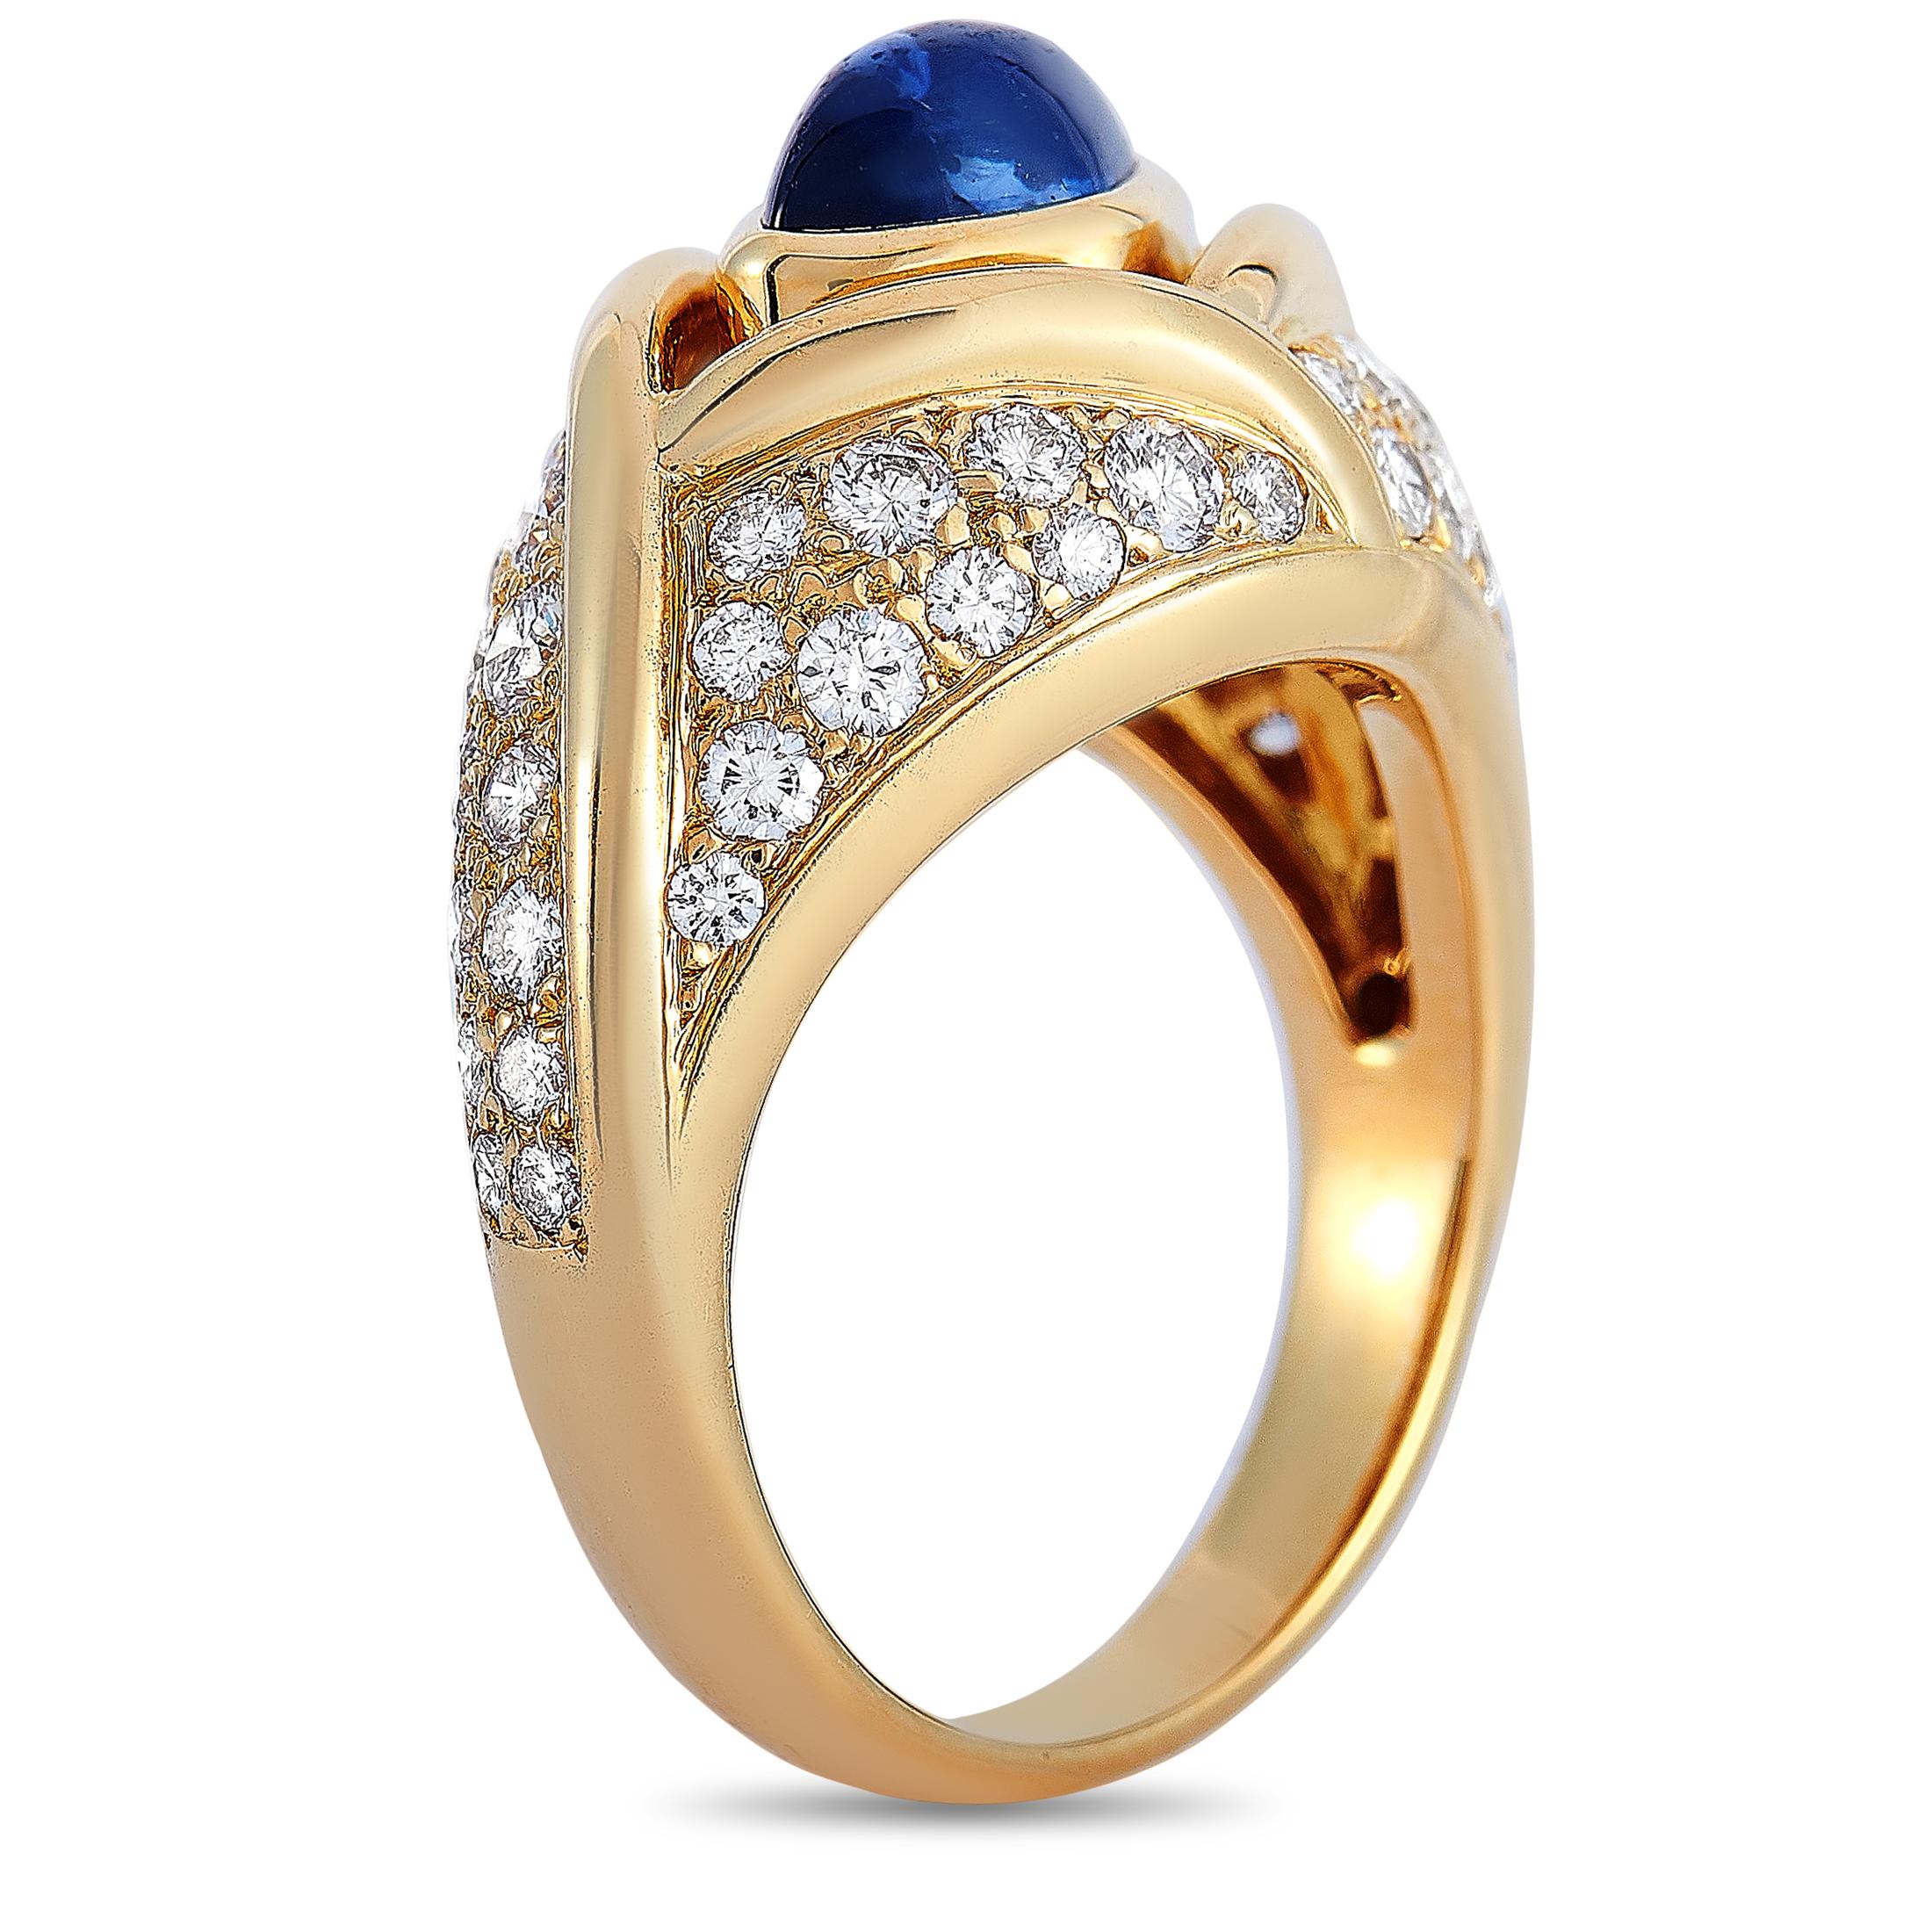 This Cartier ring is crafted from 18K yellow gold and weighs 9.8 grams, boasting band thickness of 3 mm and top height of 10 mm, while top dimensions measure 24 by 13 mm. The ring is set with a sapphire and a total of 1.10 carats of